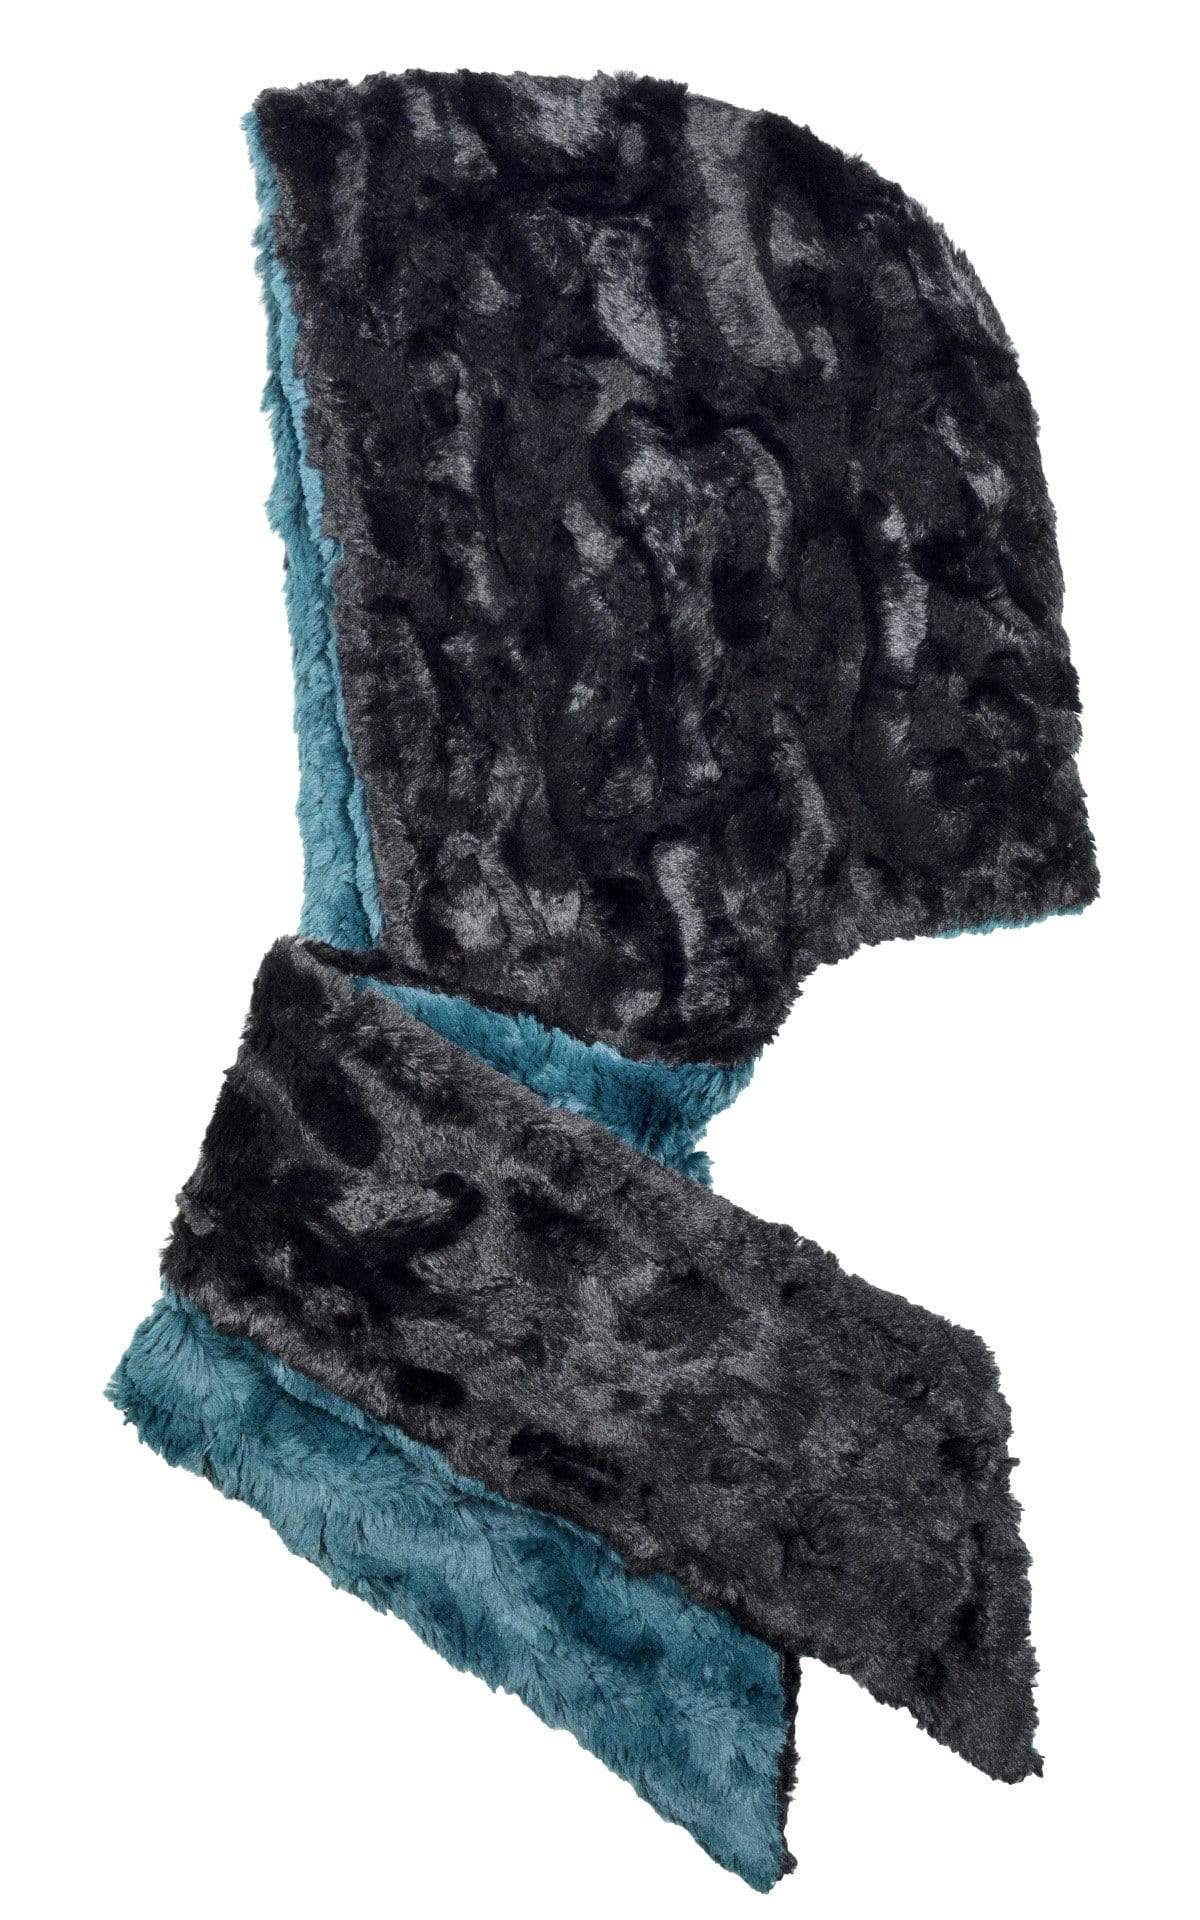 Hoody Scarf - Luxury Faux Fur in Peacock Pond with Cuddly Fur in Black